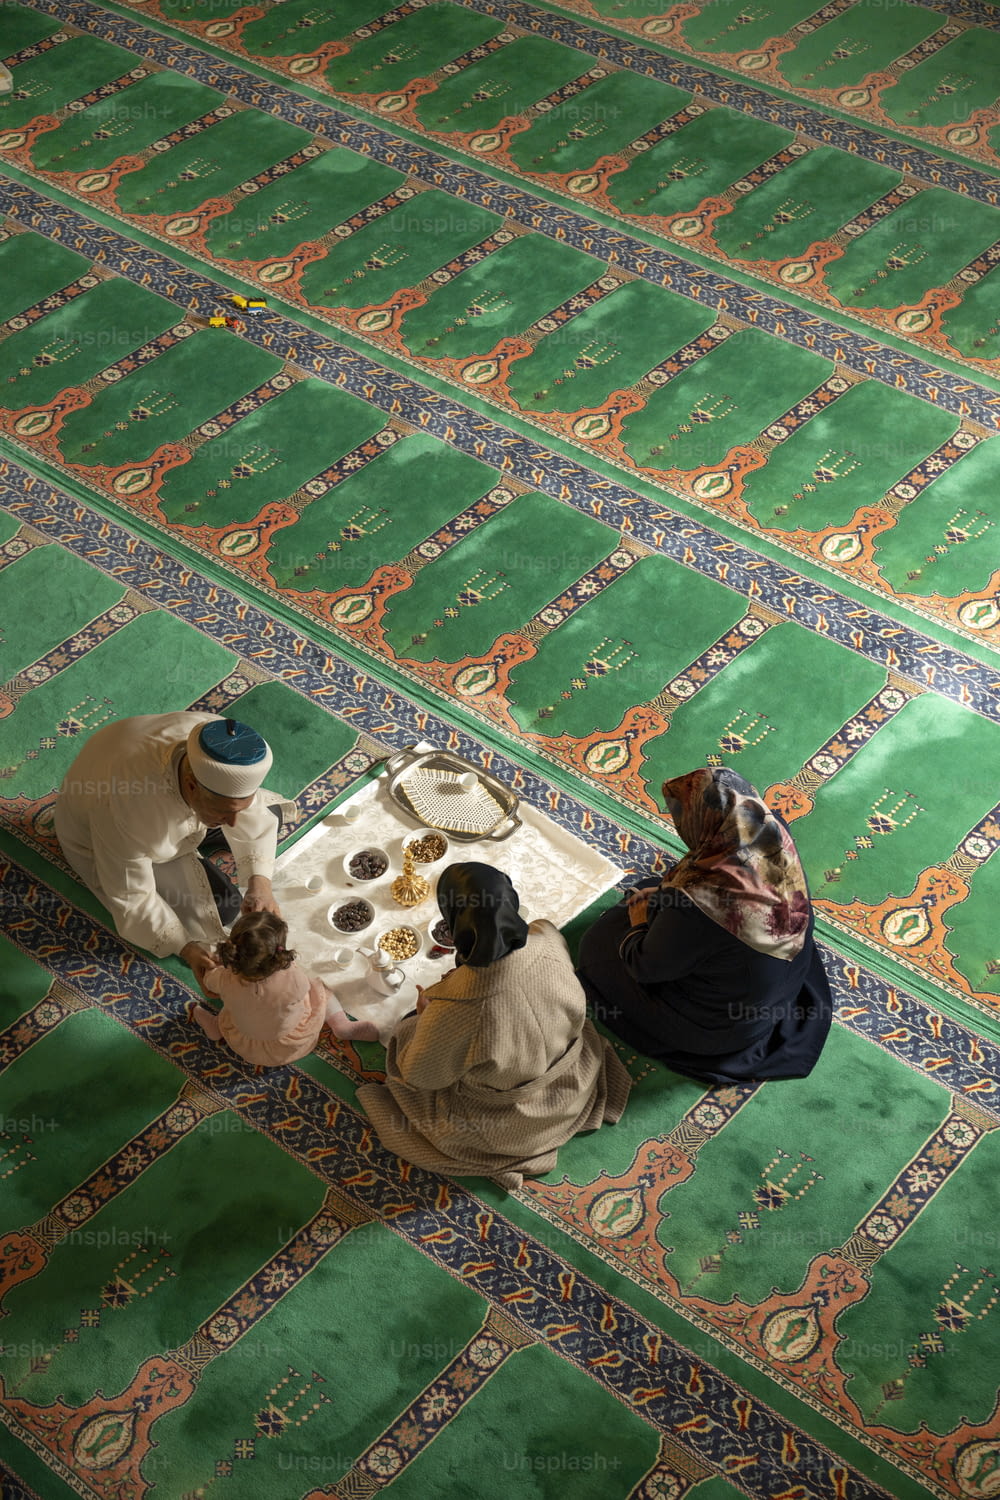 a group of people sitting on top of a green rug